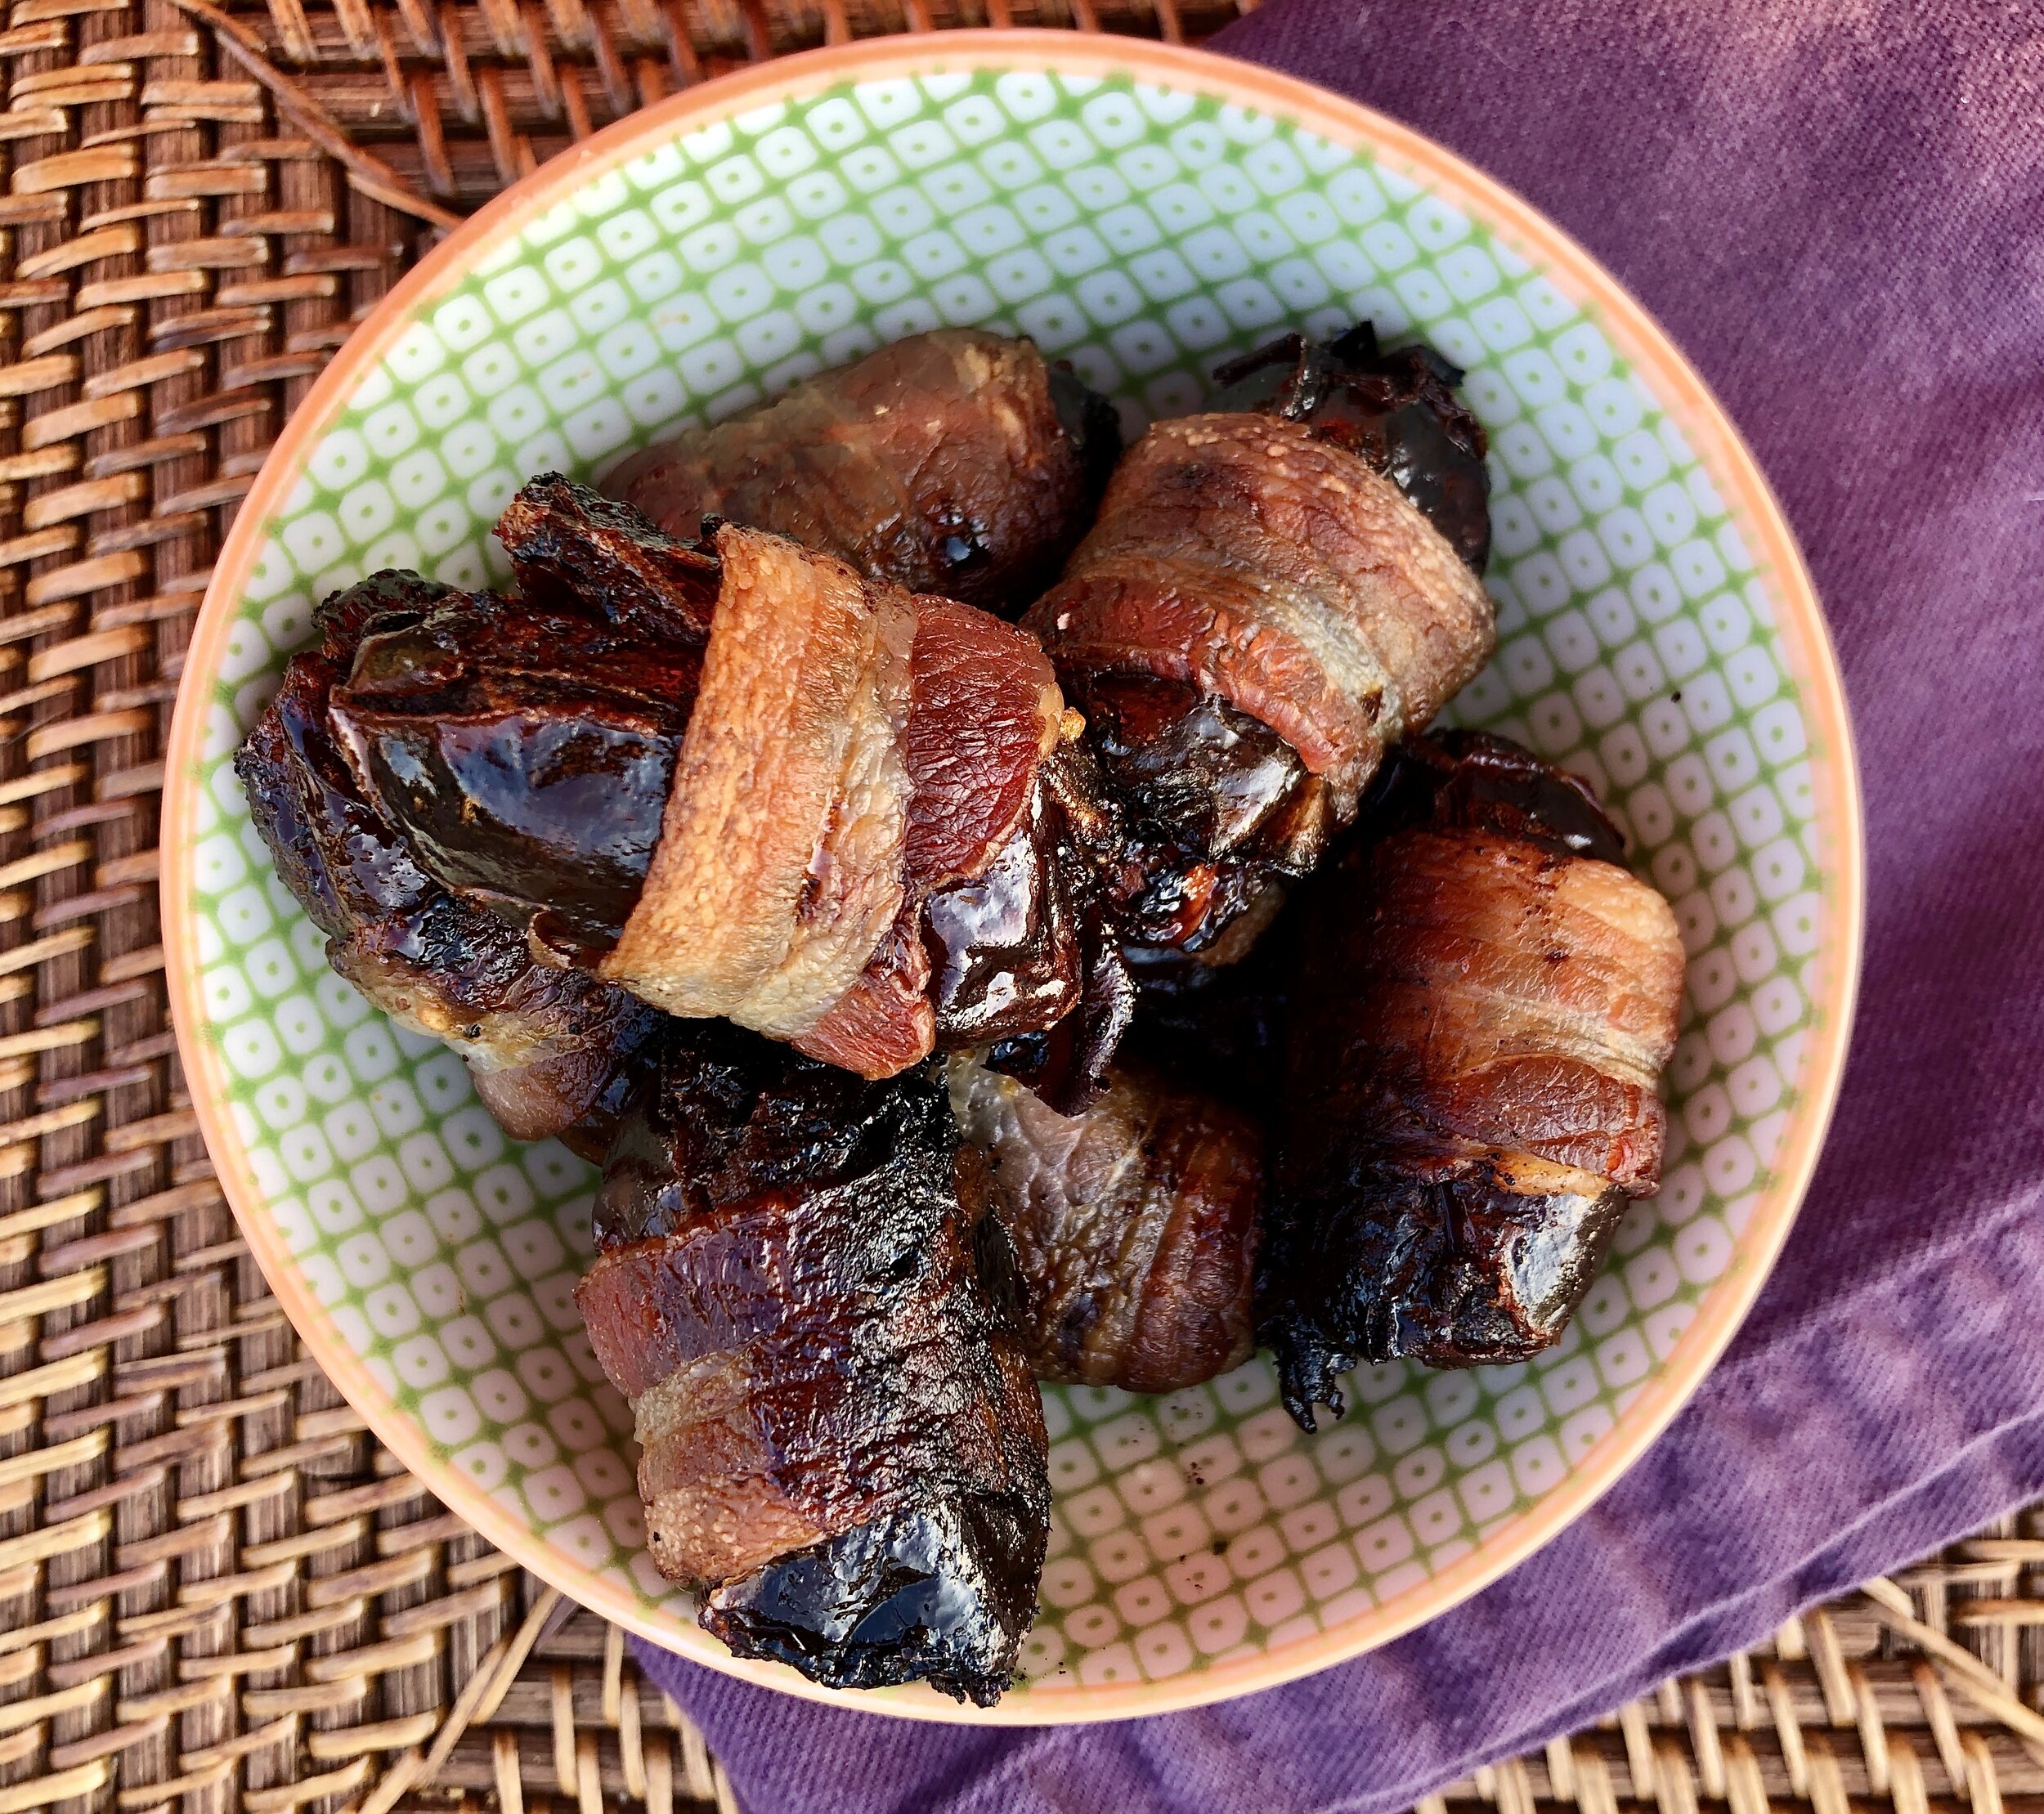 .Bacon-wrapped dates stuffed with blue cheese and smoked almonds